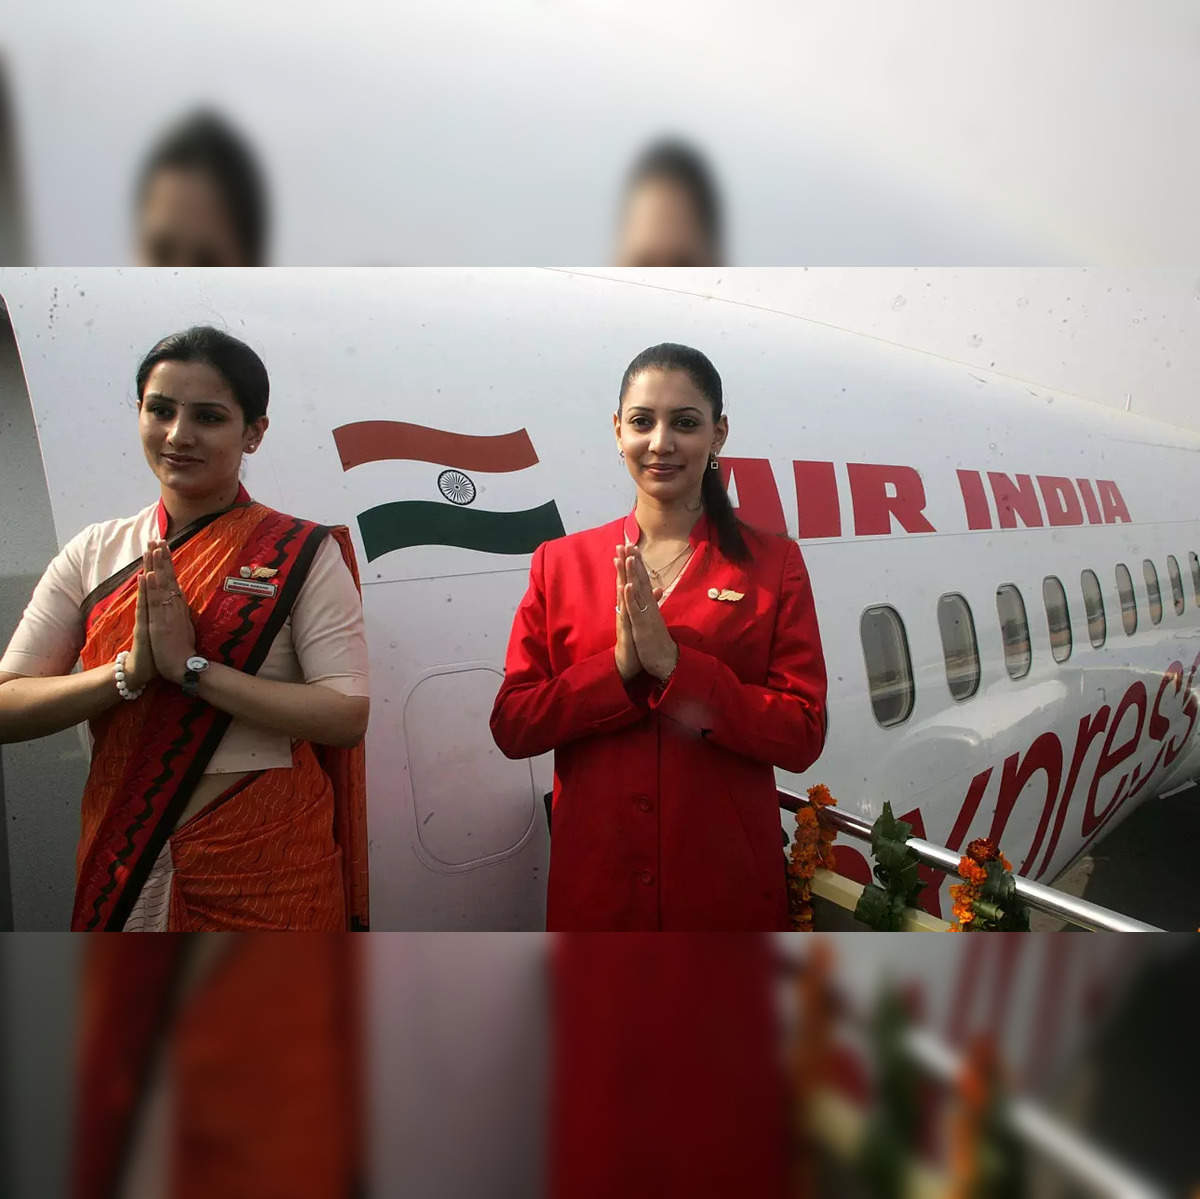 Air India presents new pilot and cabin crew uniforms - Aviation24.be